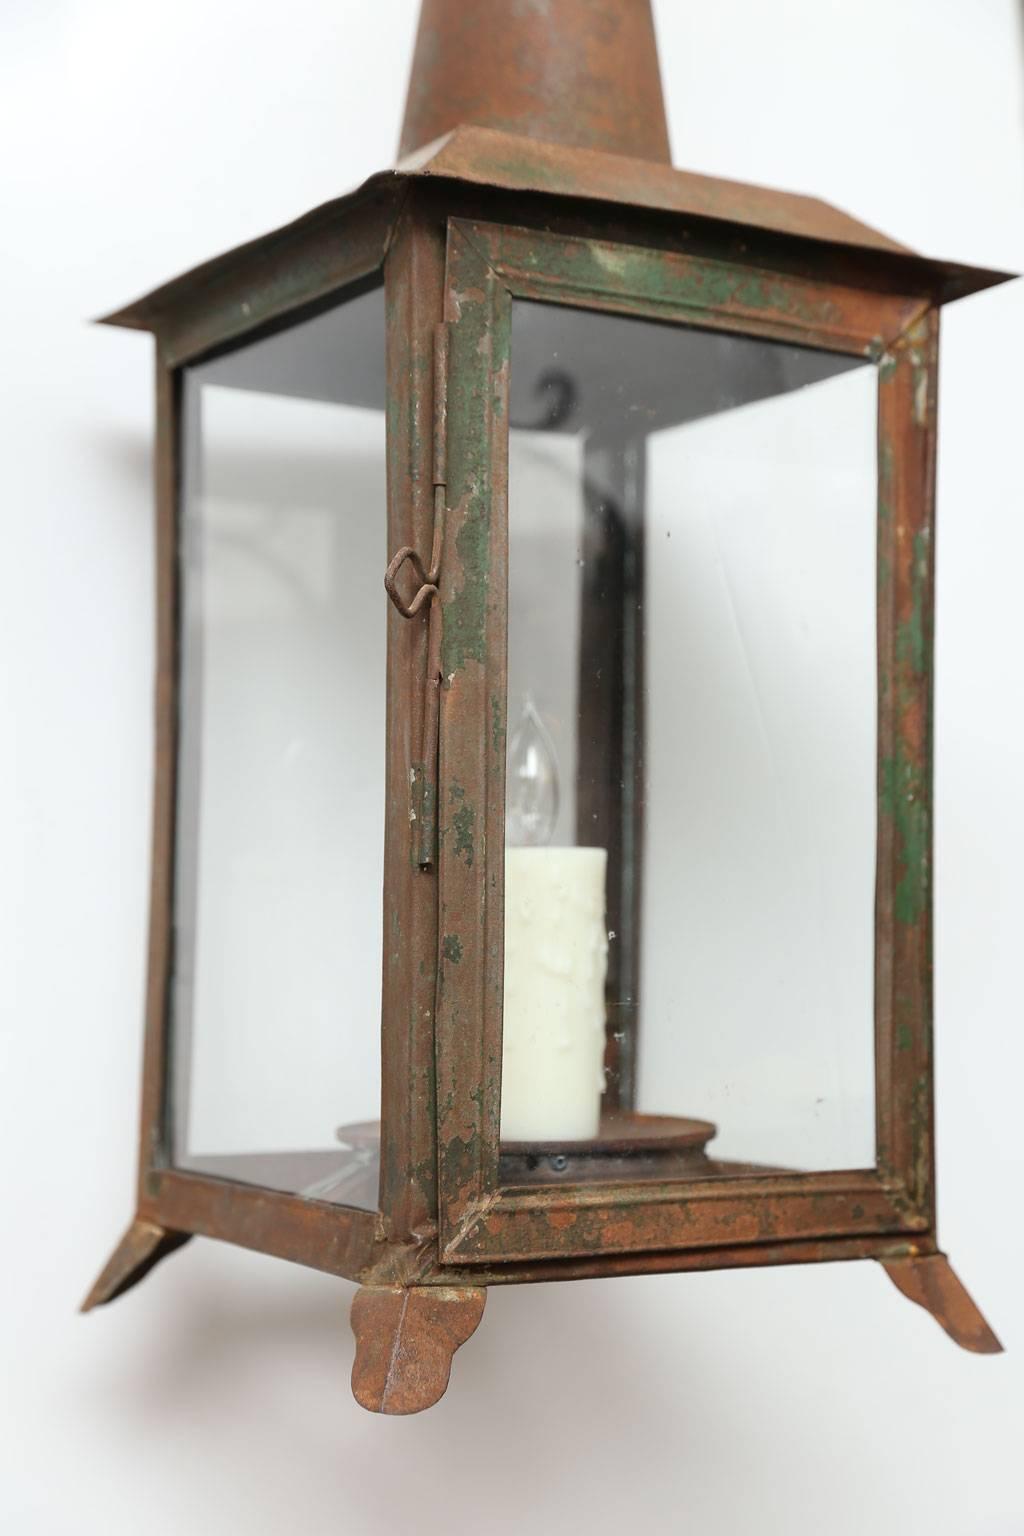 Two French tôle lanterns with remnants of original green paint and a rich patina. This pair of 19th century lanterns are each newly-wired for use within the USA and accommodates a single candelabra-size light. They include extra chain, canopies and